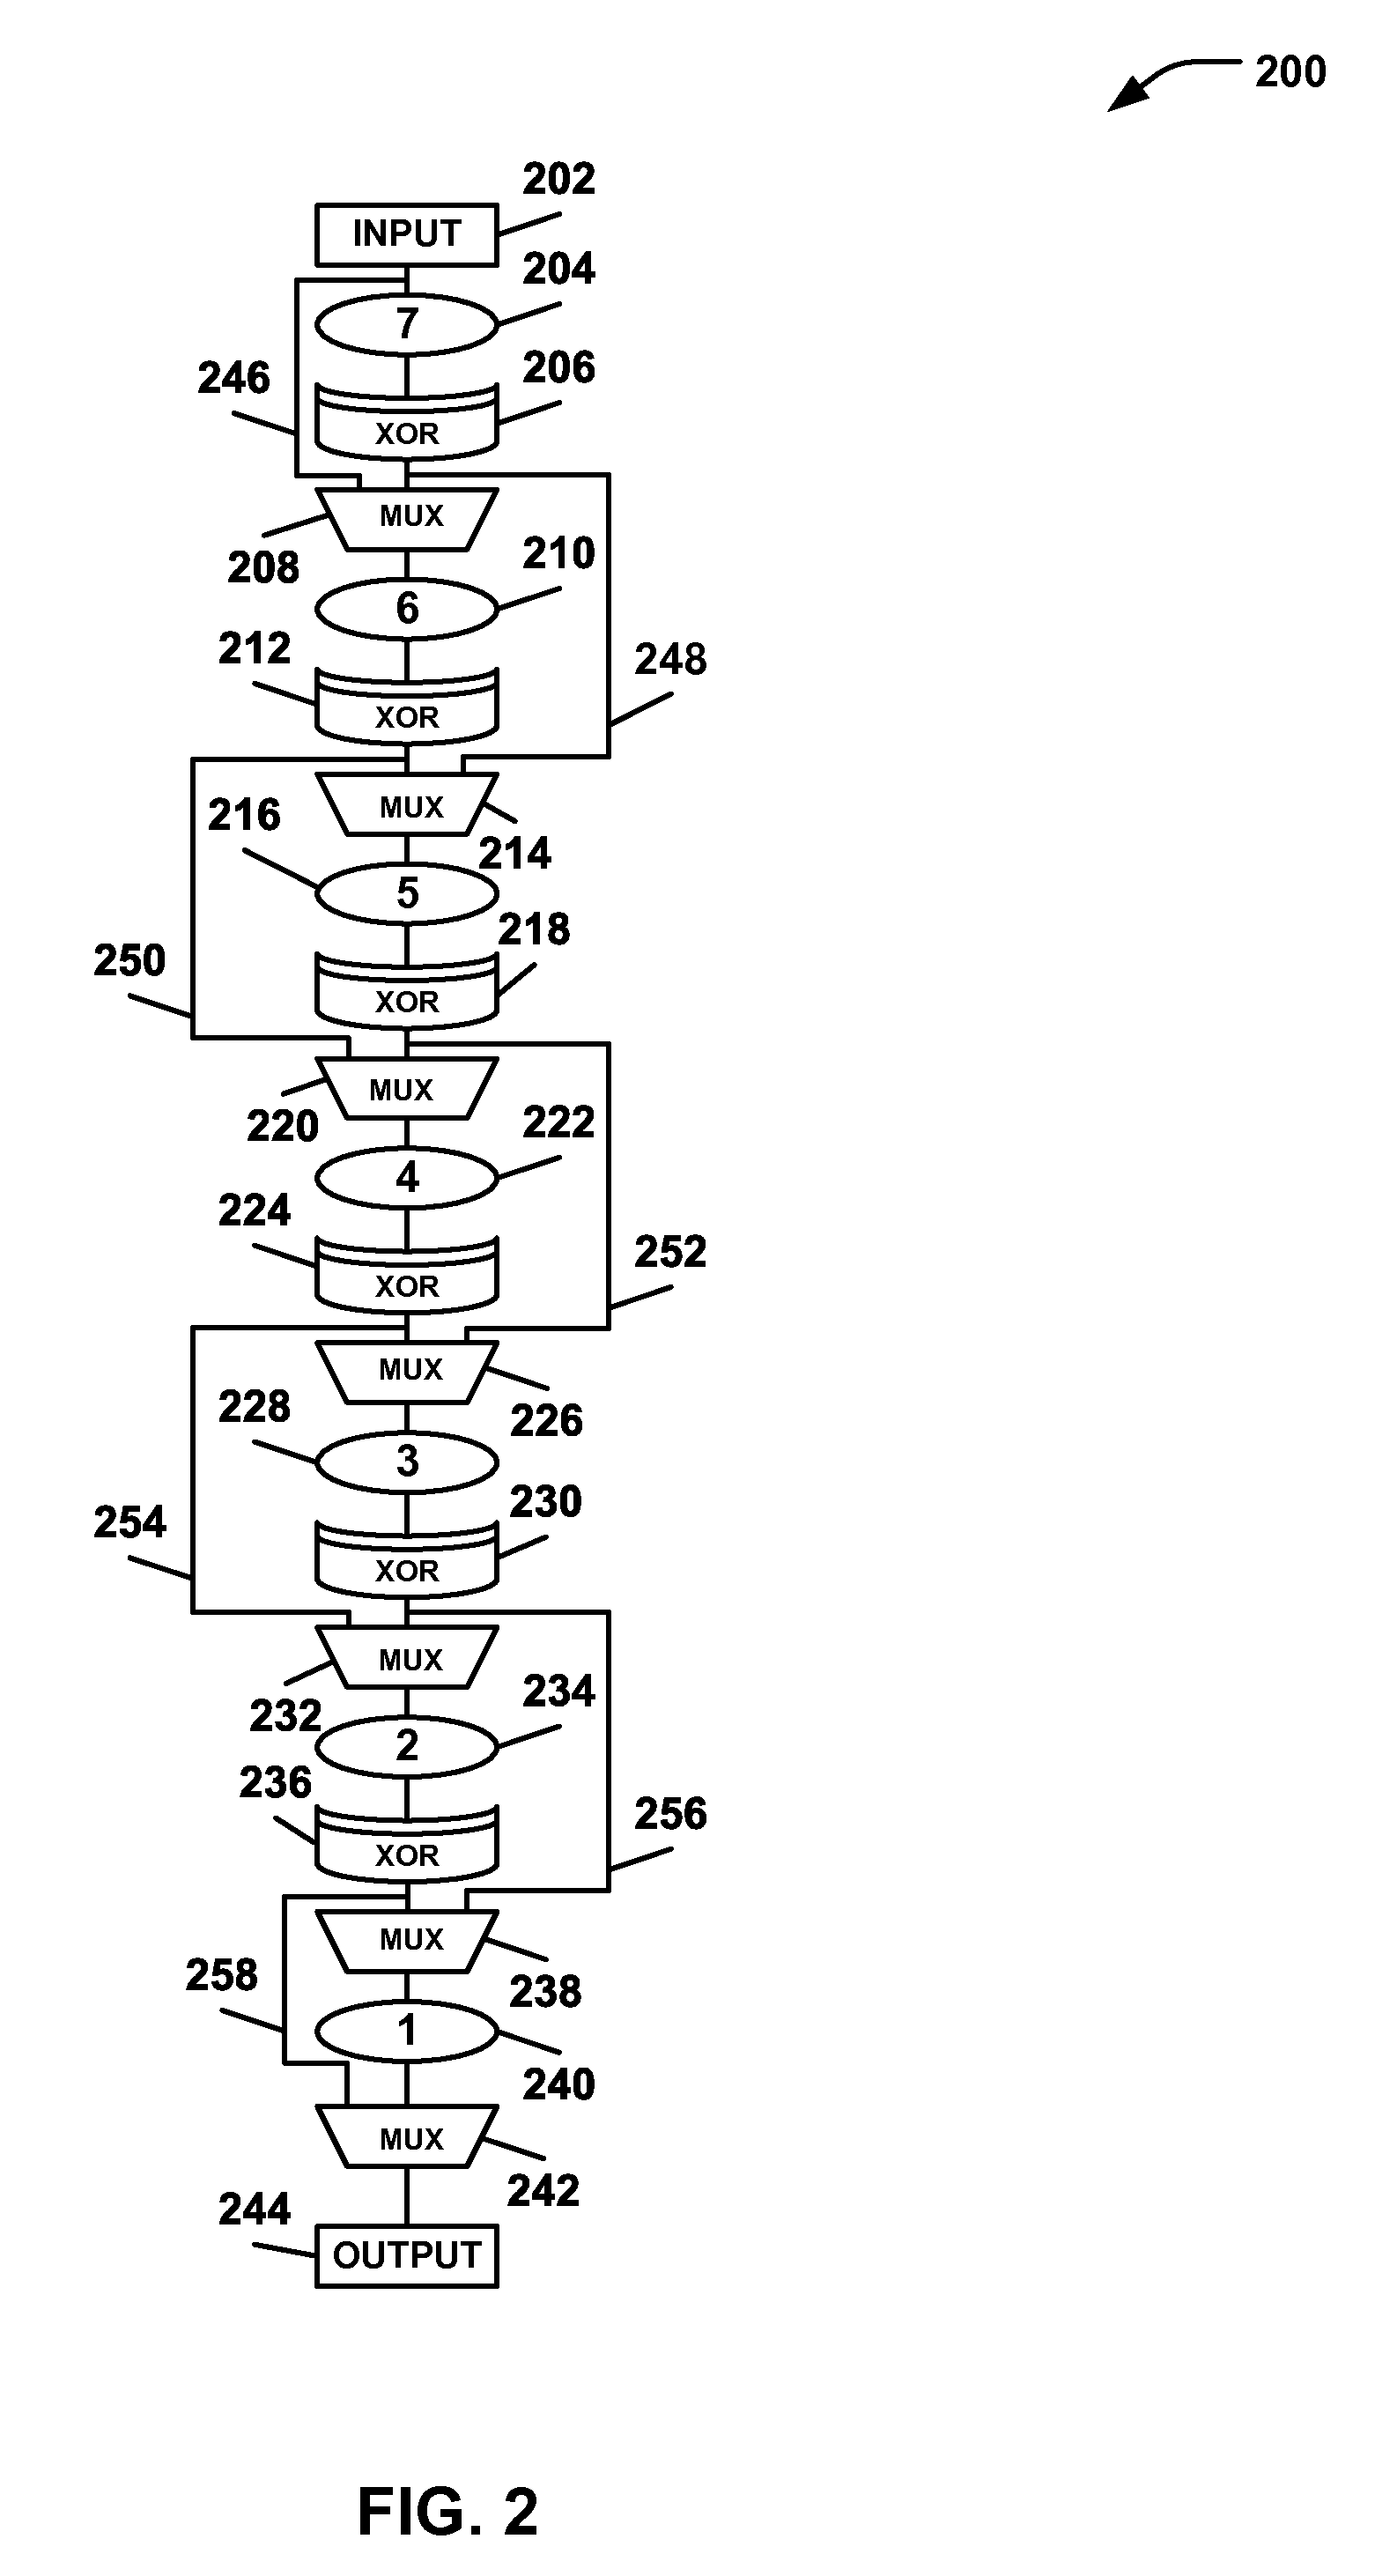 Partitioned scan chain diagnostics using multiple bypass structures and injection points